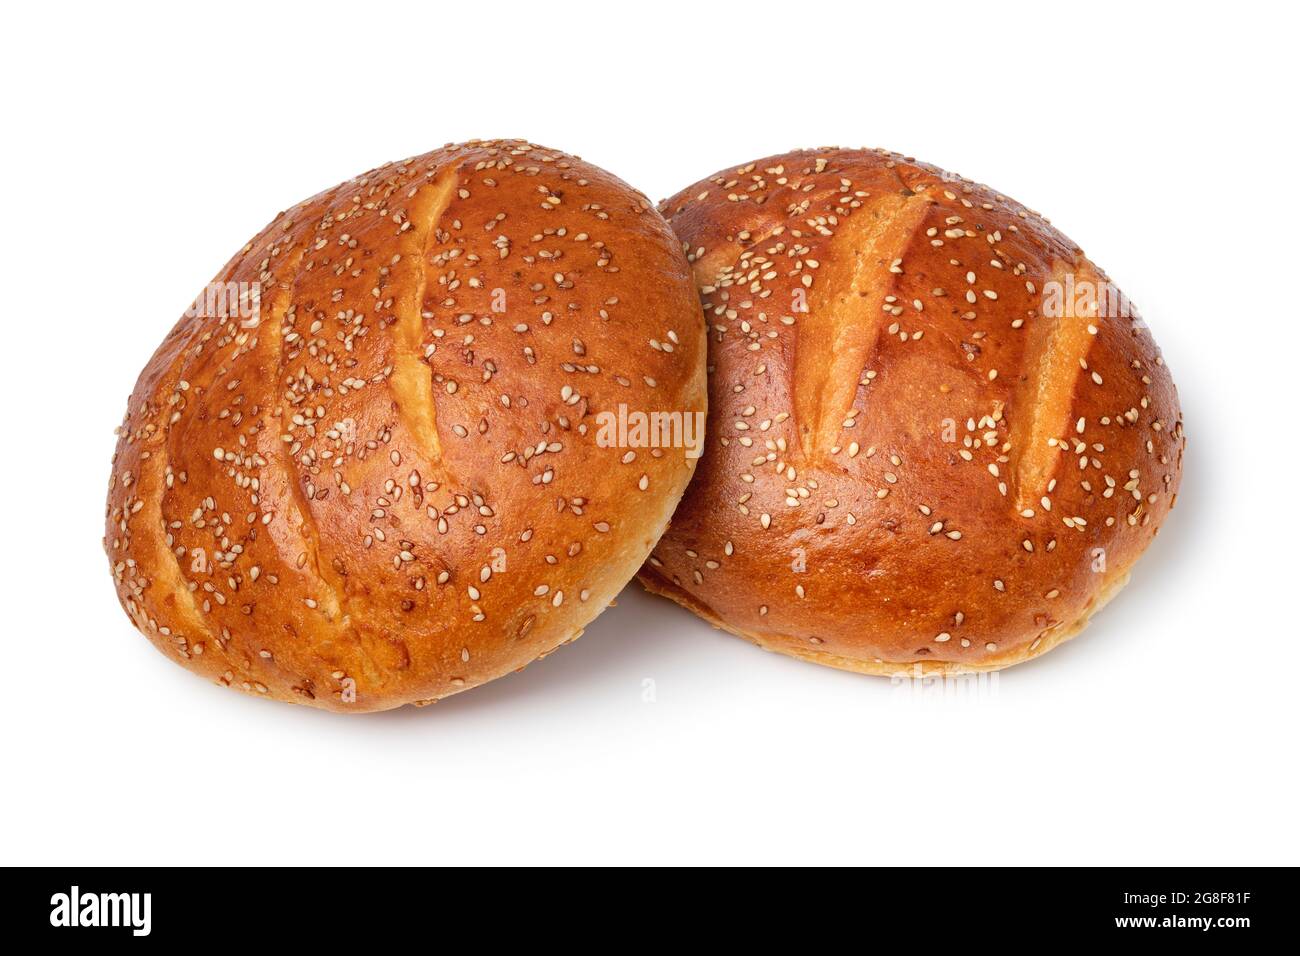 Pair of traditional fresh baked Moroccan krachel, sweet rolls, isolated on white background Stock Photo